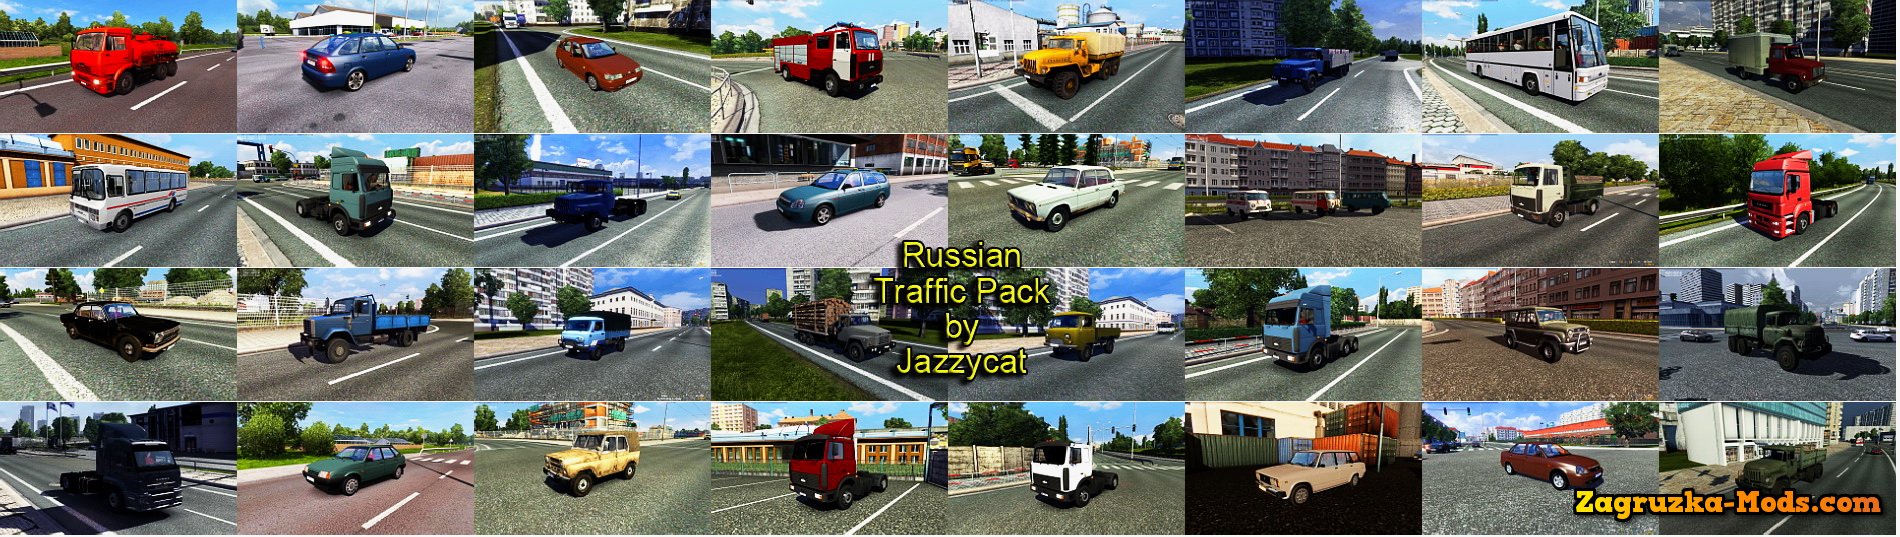 Russian Traffic Pack v1.4.1 by Jazzycat for ETS 2